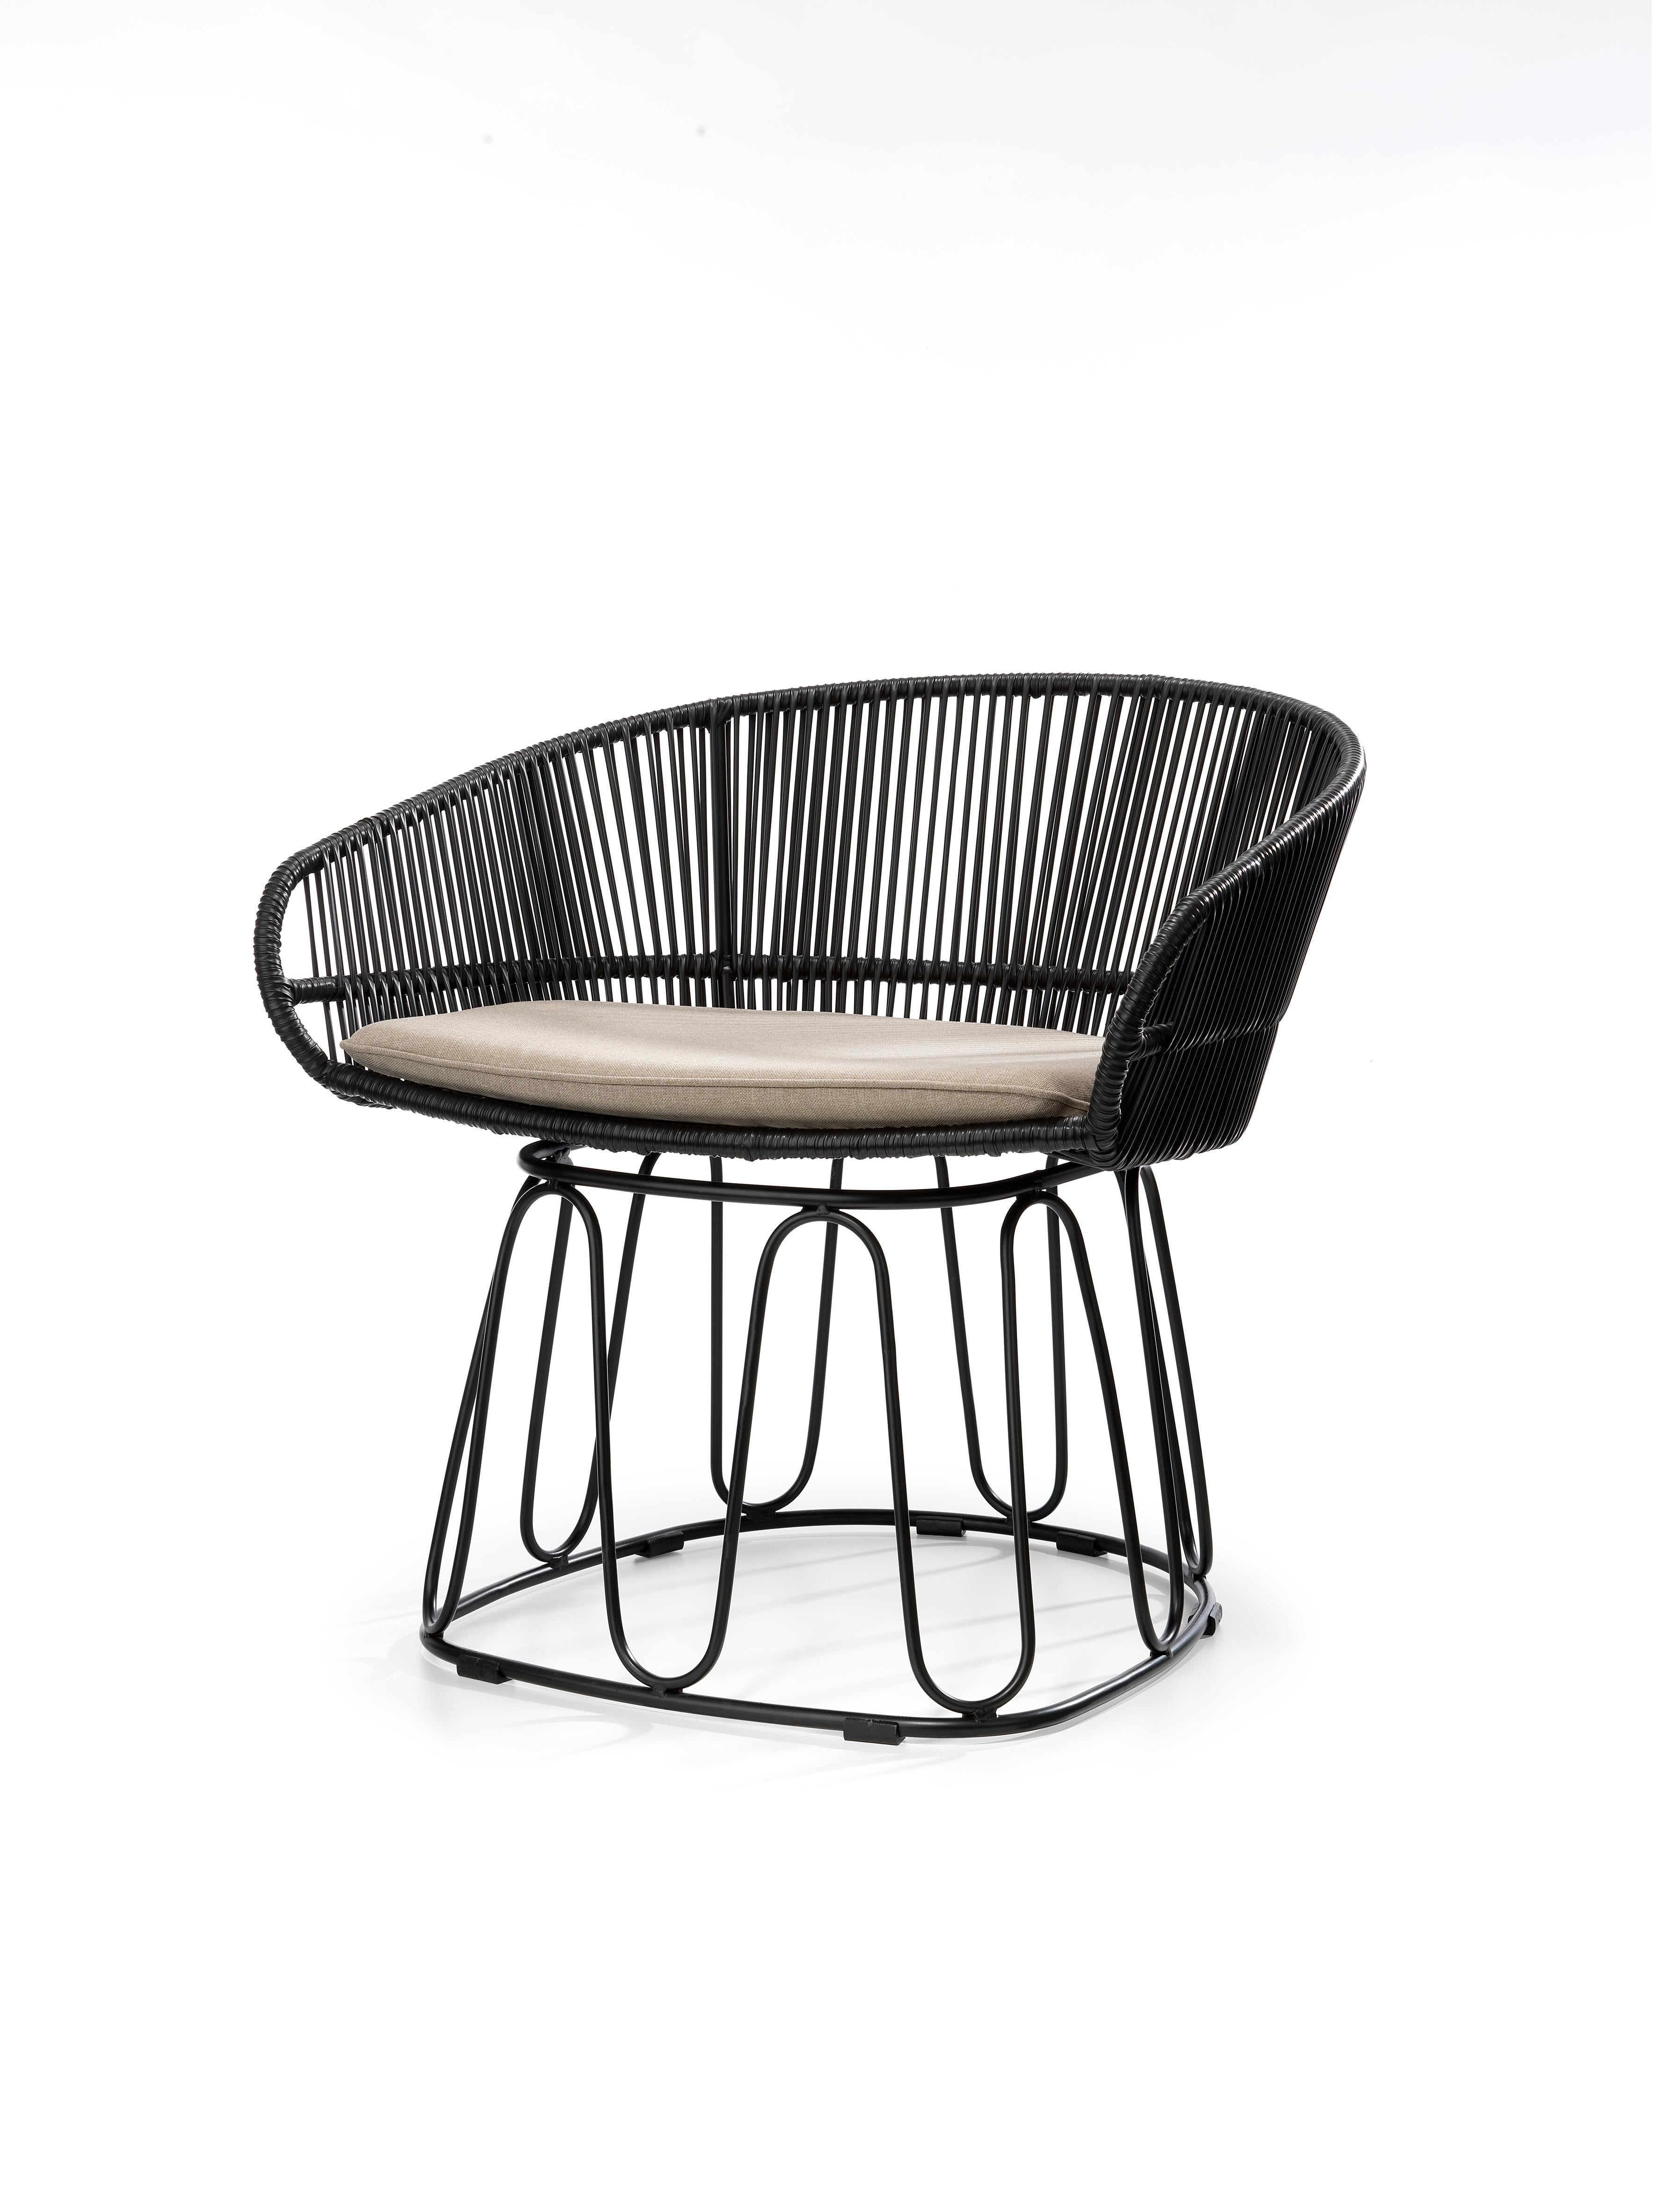 Set of 4 Black Circo lounge chair by Sebastian Herkner
Materials: Galvanized and powder-coated tubular steel. PVC strings.
Technique: Made from recycled plastic. Weaved by local craftspeople in Colombia. 
Dimensions: W 74 x D 66.2 x H 73 cm